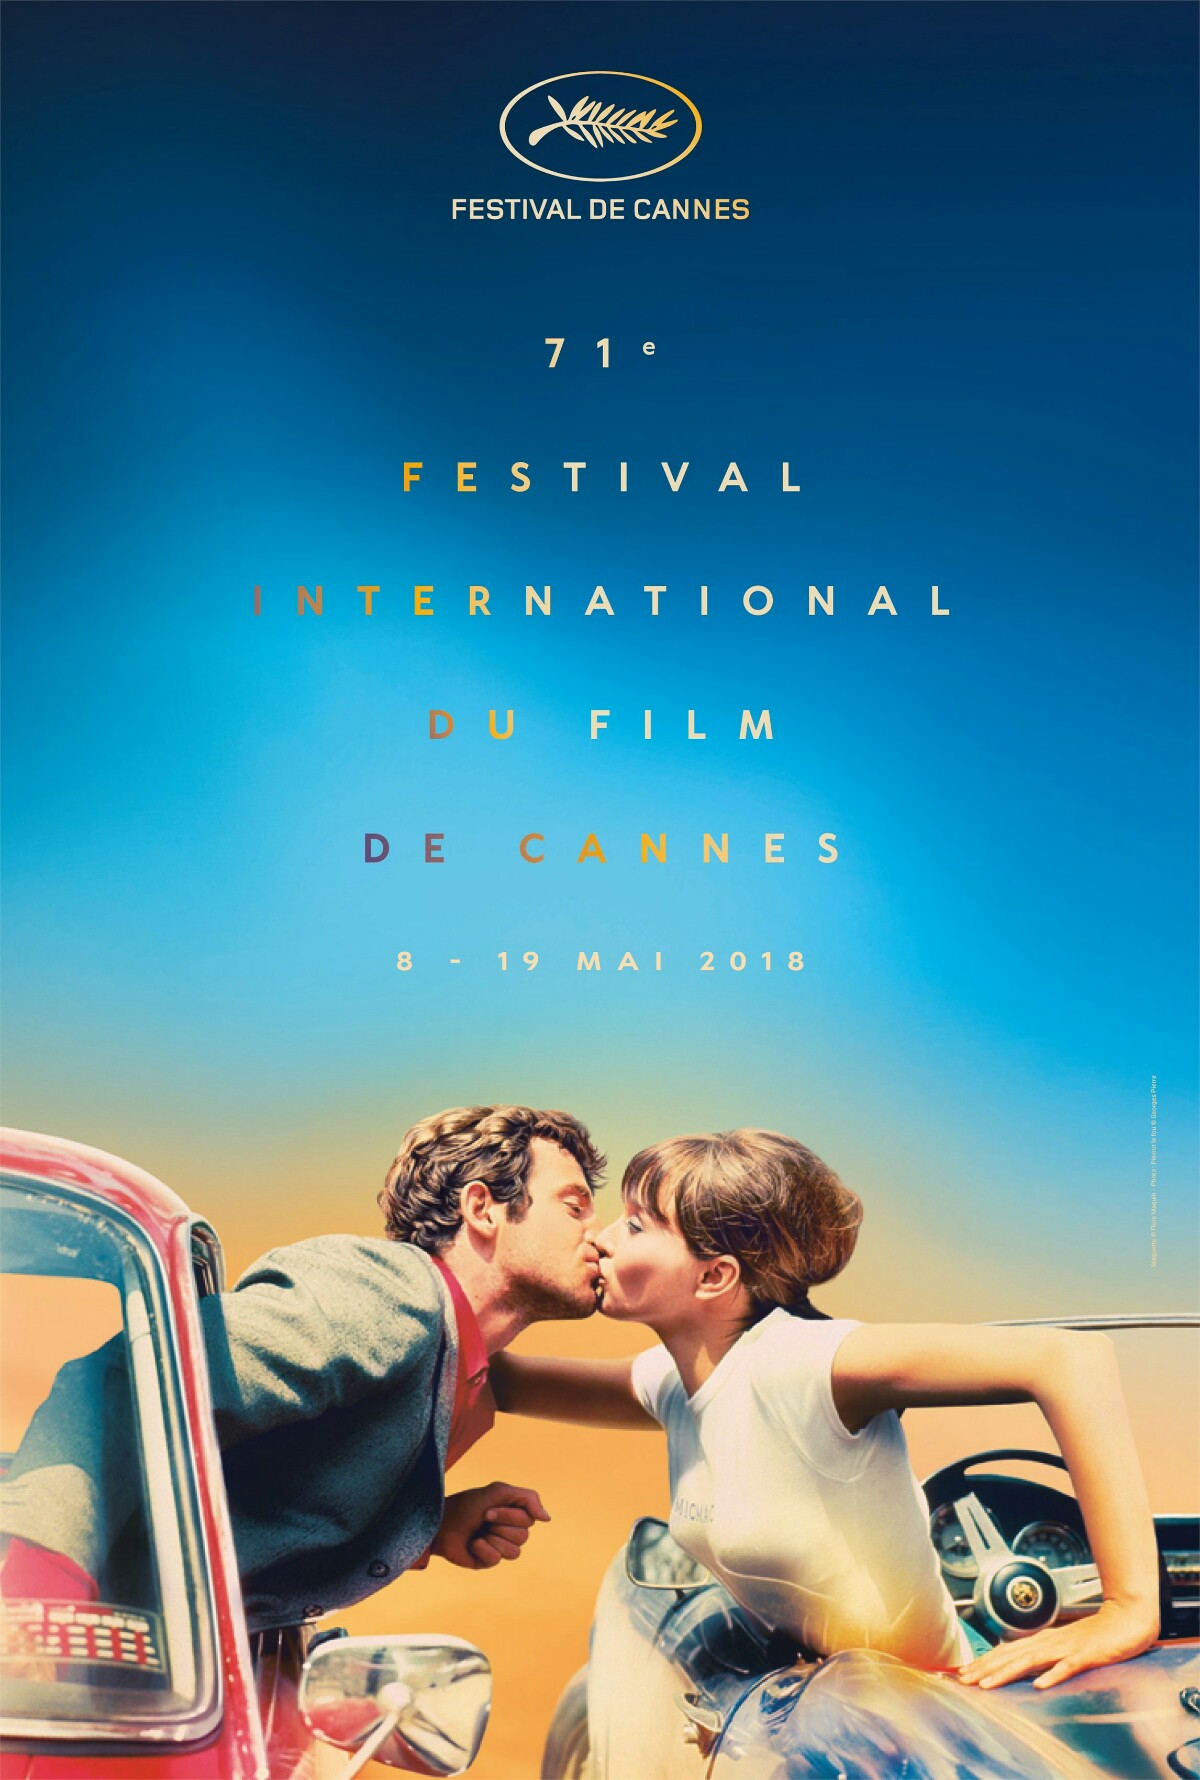 Renault 35 Years With The Cannes Film Festival 1200x1780